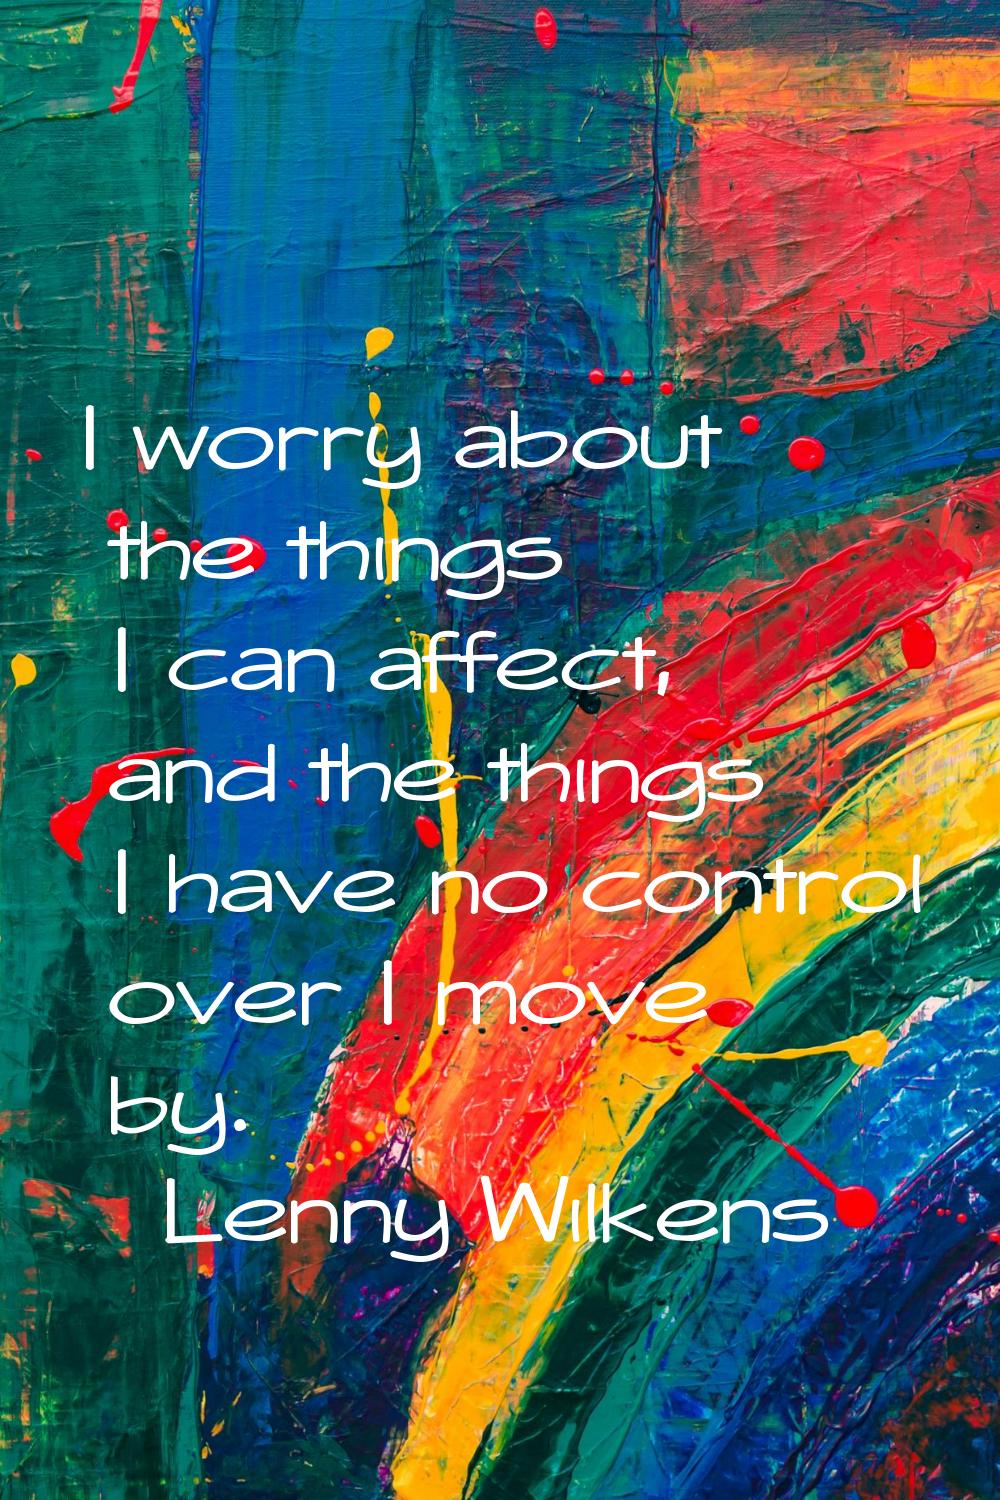 I worry about the things I can affect, and the things I have no control over I move by.